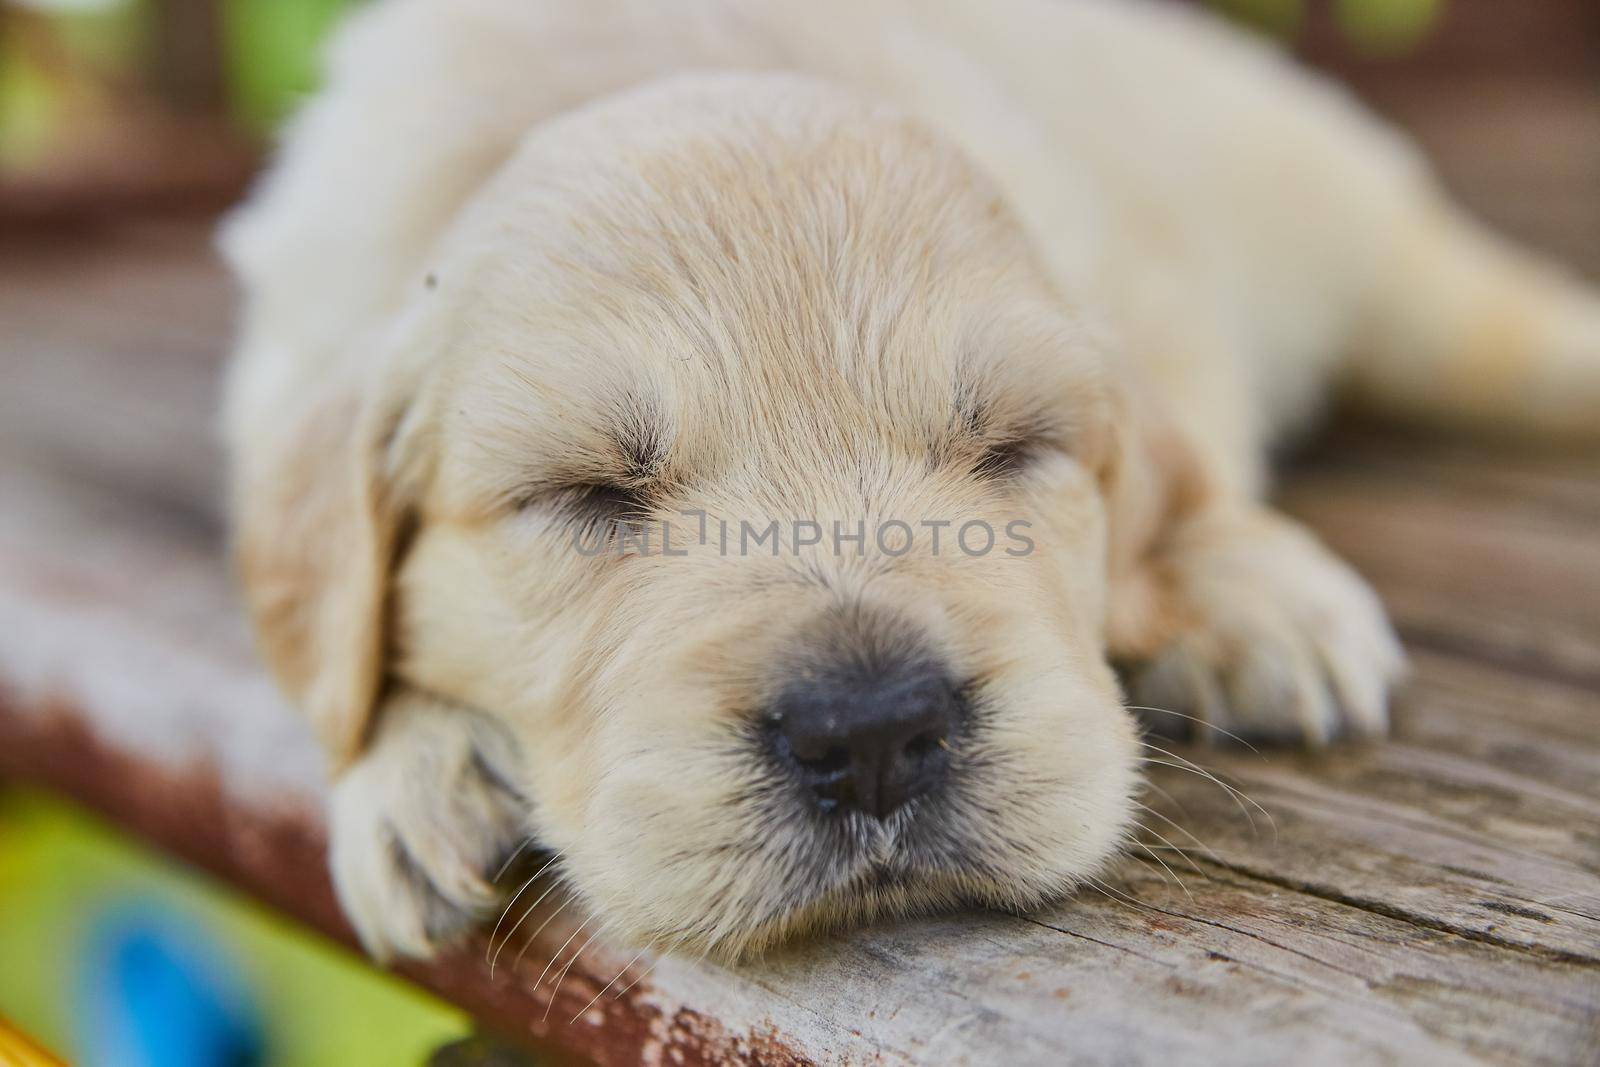 Image of Close up of white golden retriever puppy sleeping on wood decking